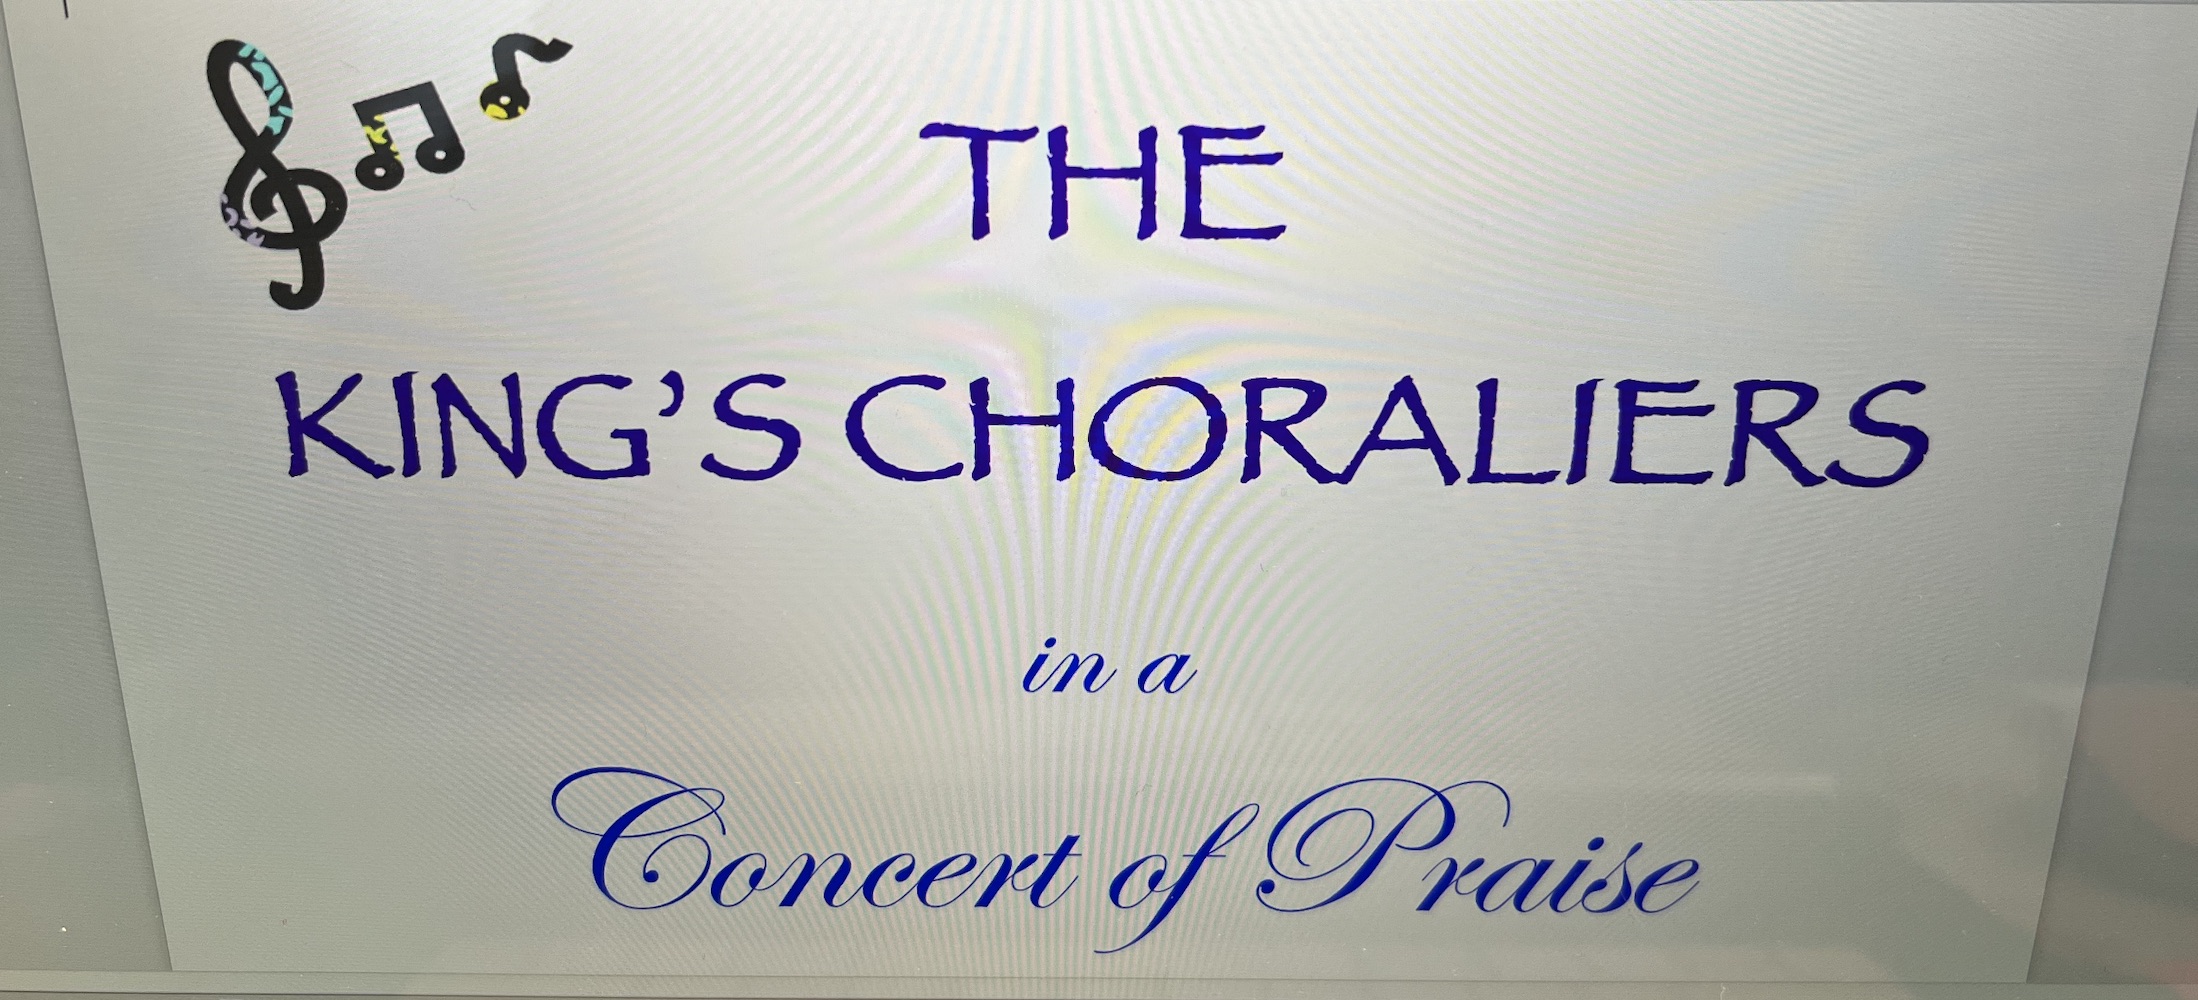 You are currently viewing The King’s Choraliers’ Concert of Praise